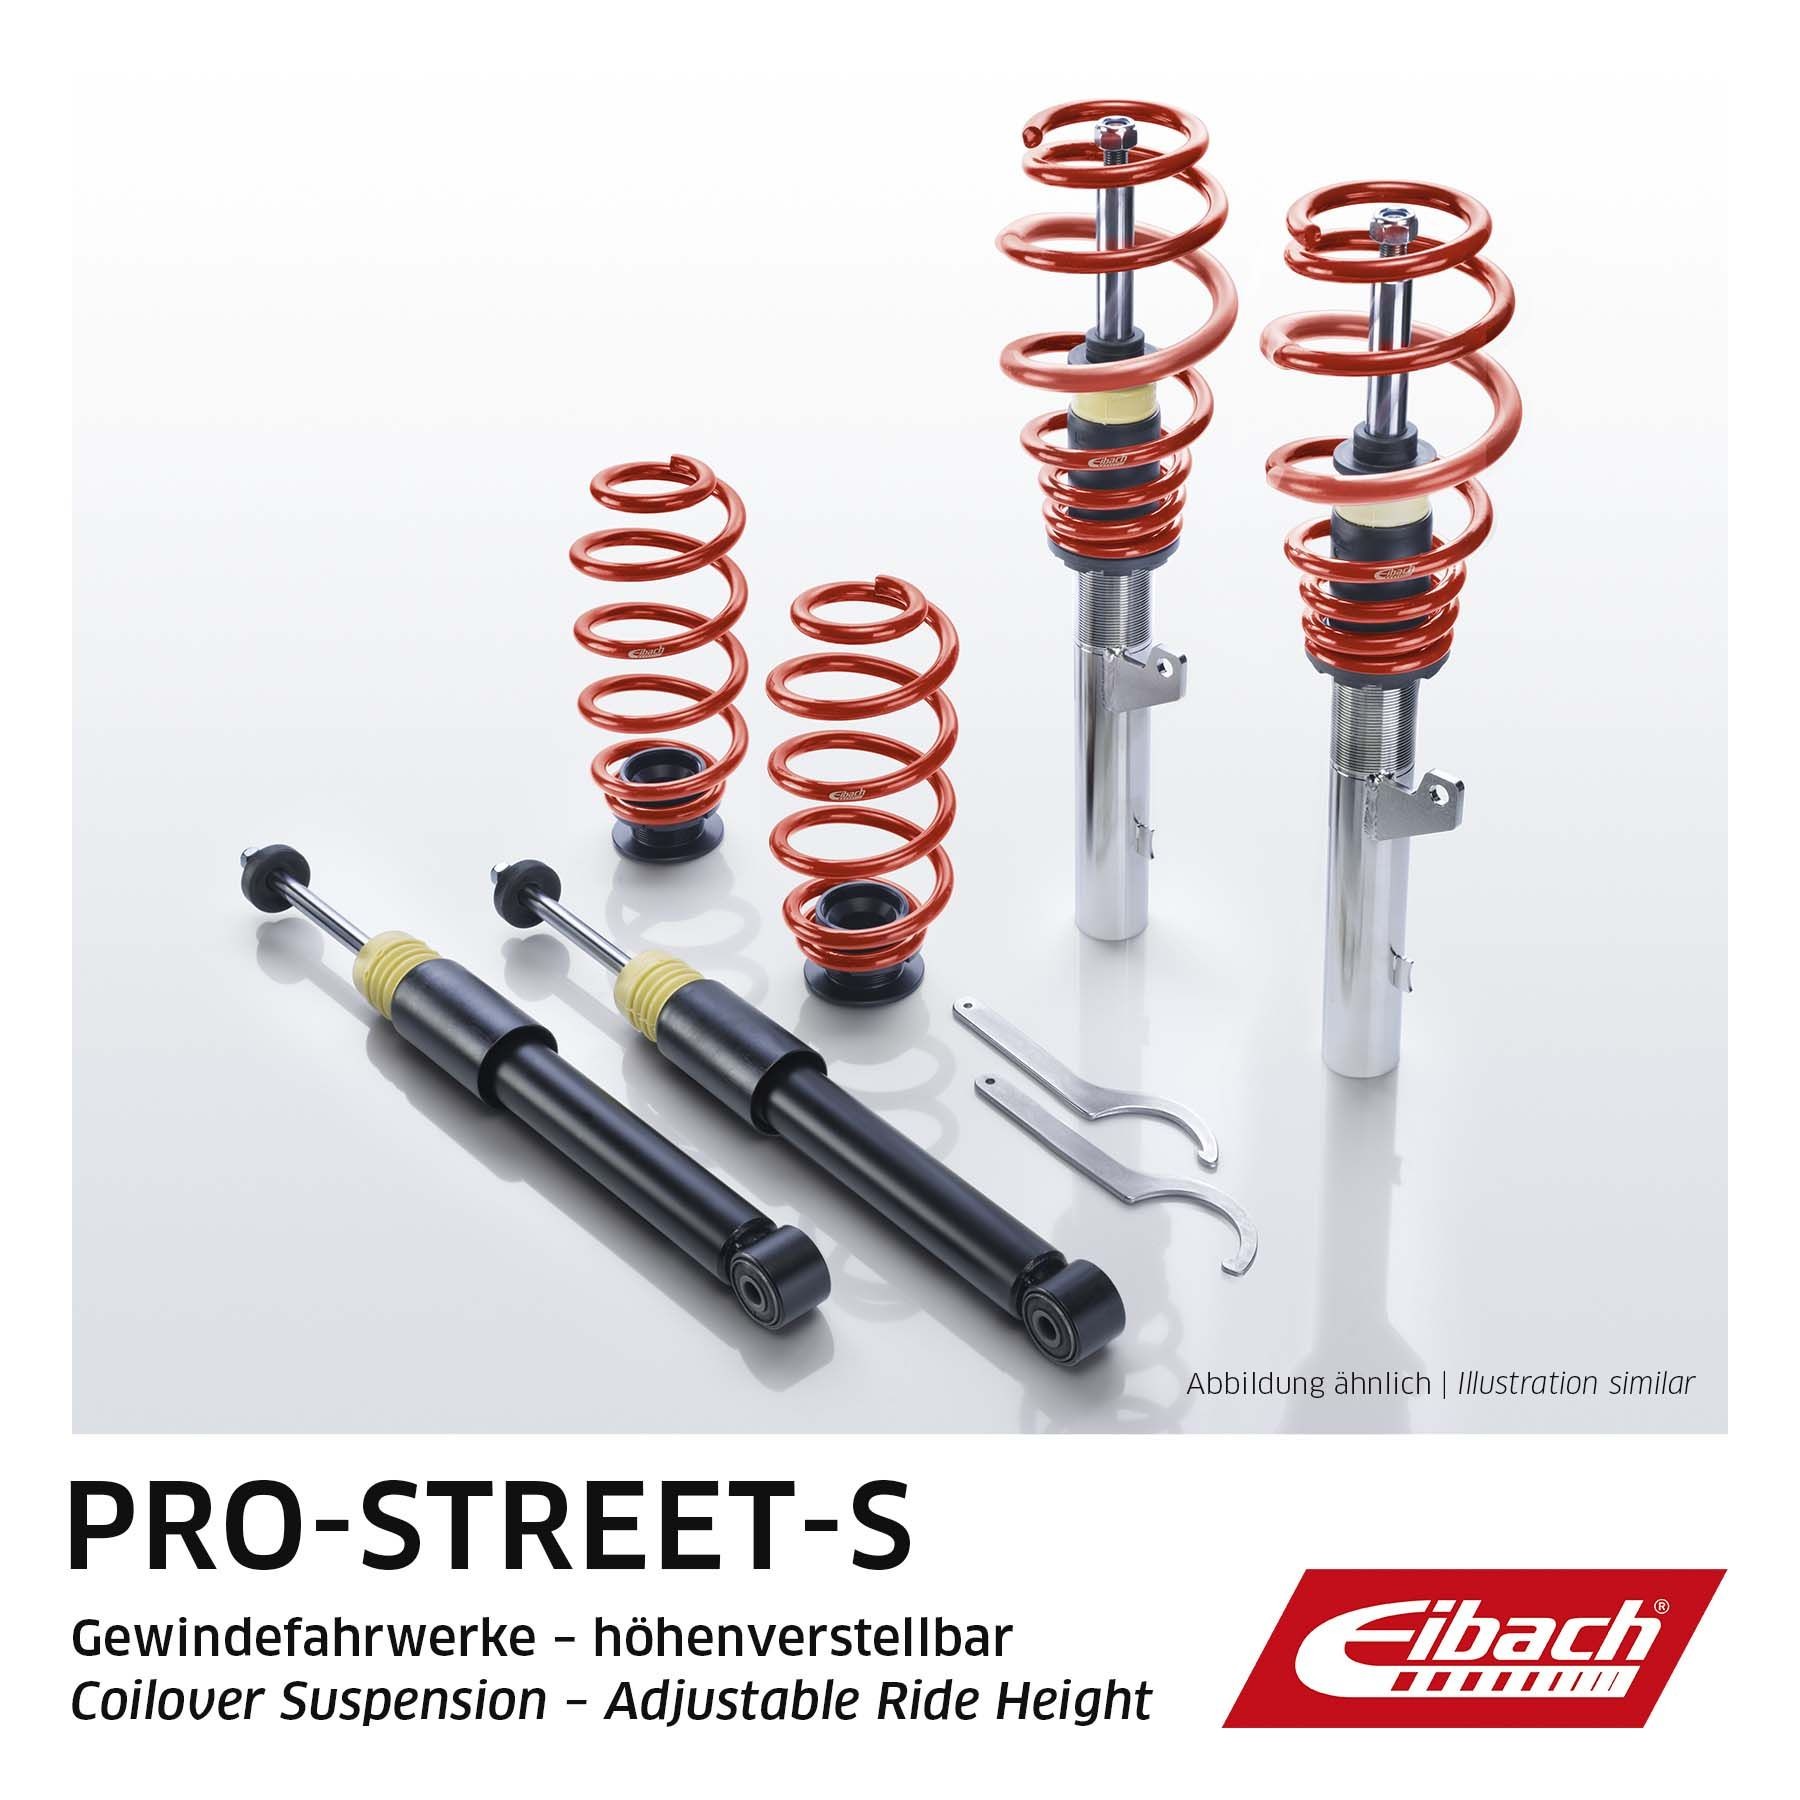 65200110122 EIBACH Pro-Street-S PSS65200110122 Suspension kit, coil springs / shock absorbers BMW E60 535d 3.0 272 hp Diesel 2007 price